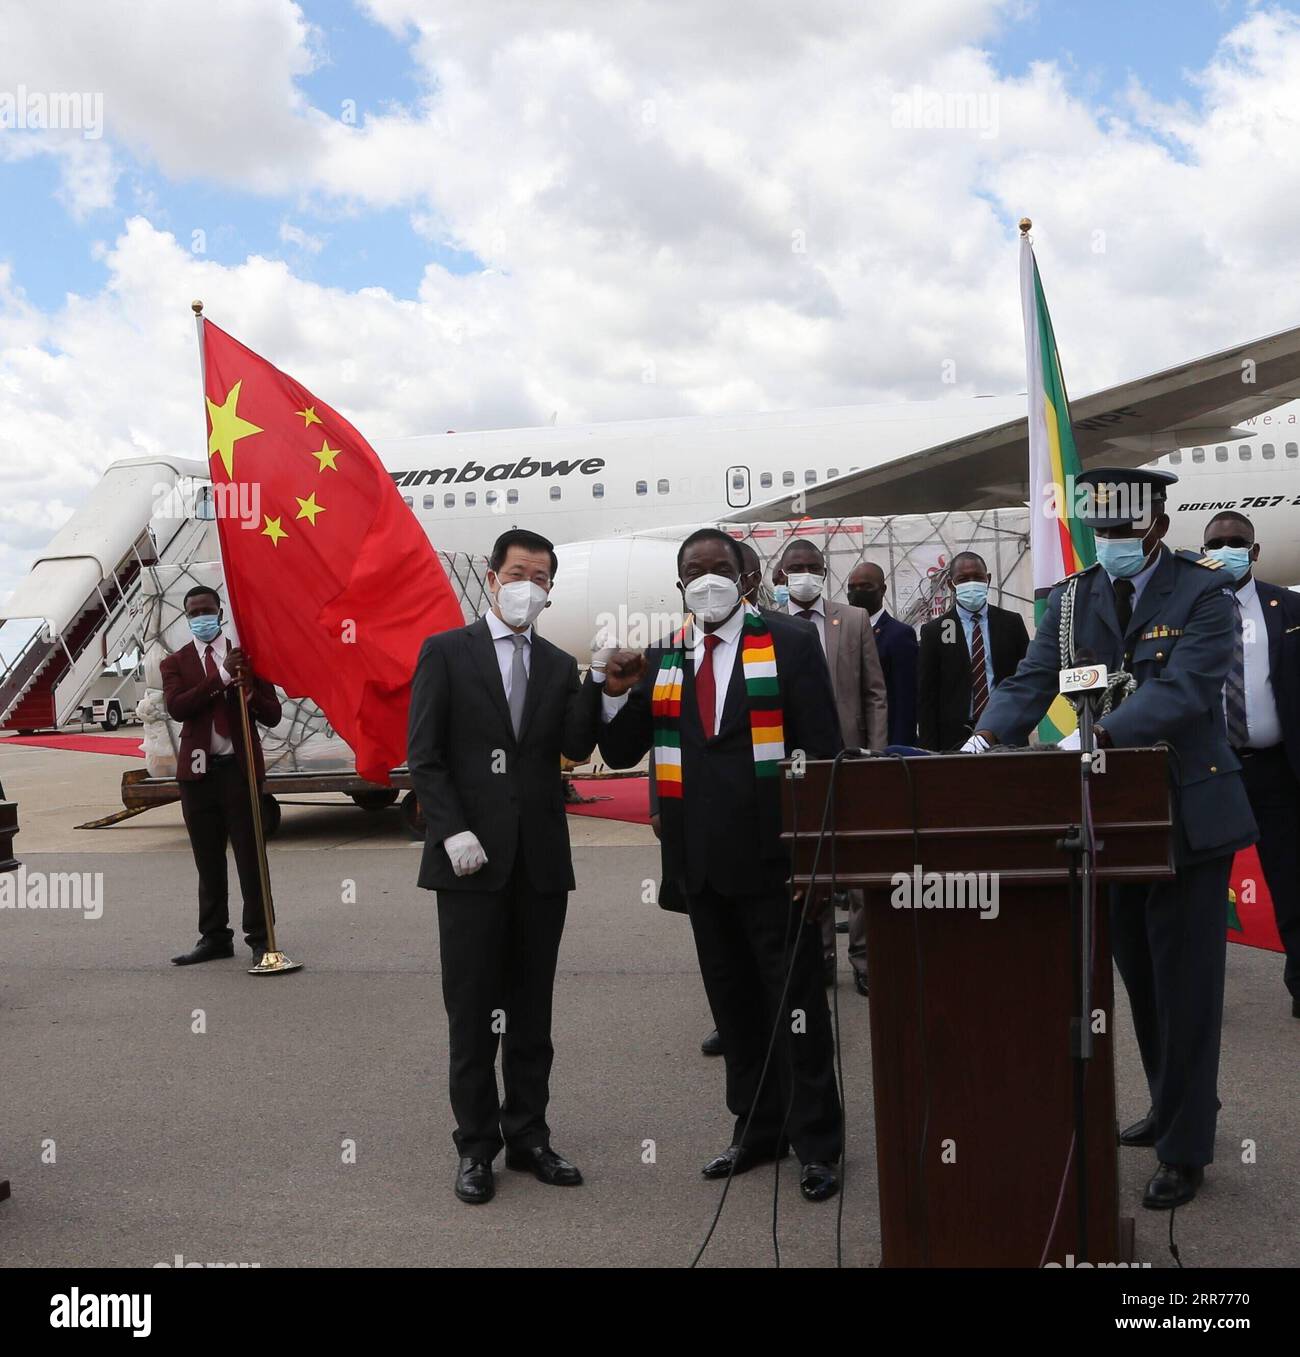 210316 -- HARARE, March 16, 2021 -- Zimbabwean President Emmerson Mnangagwa 2nd L, front and Chinese Ambassador to Zimbabwe Guo Shaochun 1st L, front pose for a photo as a batch of COVID-19 vaccines arrive at Robert Gabriel Mugabe International Airport in Harare, Zimbabwe, on March 16, 2021. Zimbabwe on Tuesday received a second batch of Sinopharm doses donated by China plus an additional Sinovac doses commercially procured by the government.  ZIMBABWE-HARARE-CHINA-COVID-19 VACCINE-ARRIVAL ZhangxYuliang PUBLICATIONxNOTxINxCHN Stock Photo